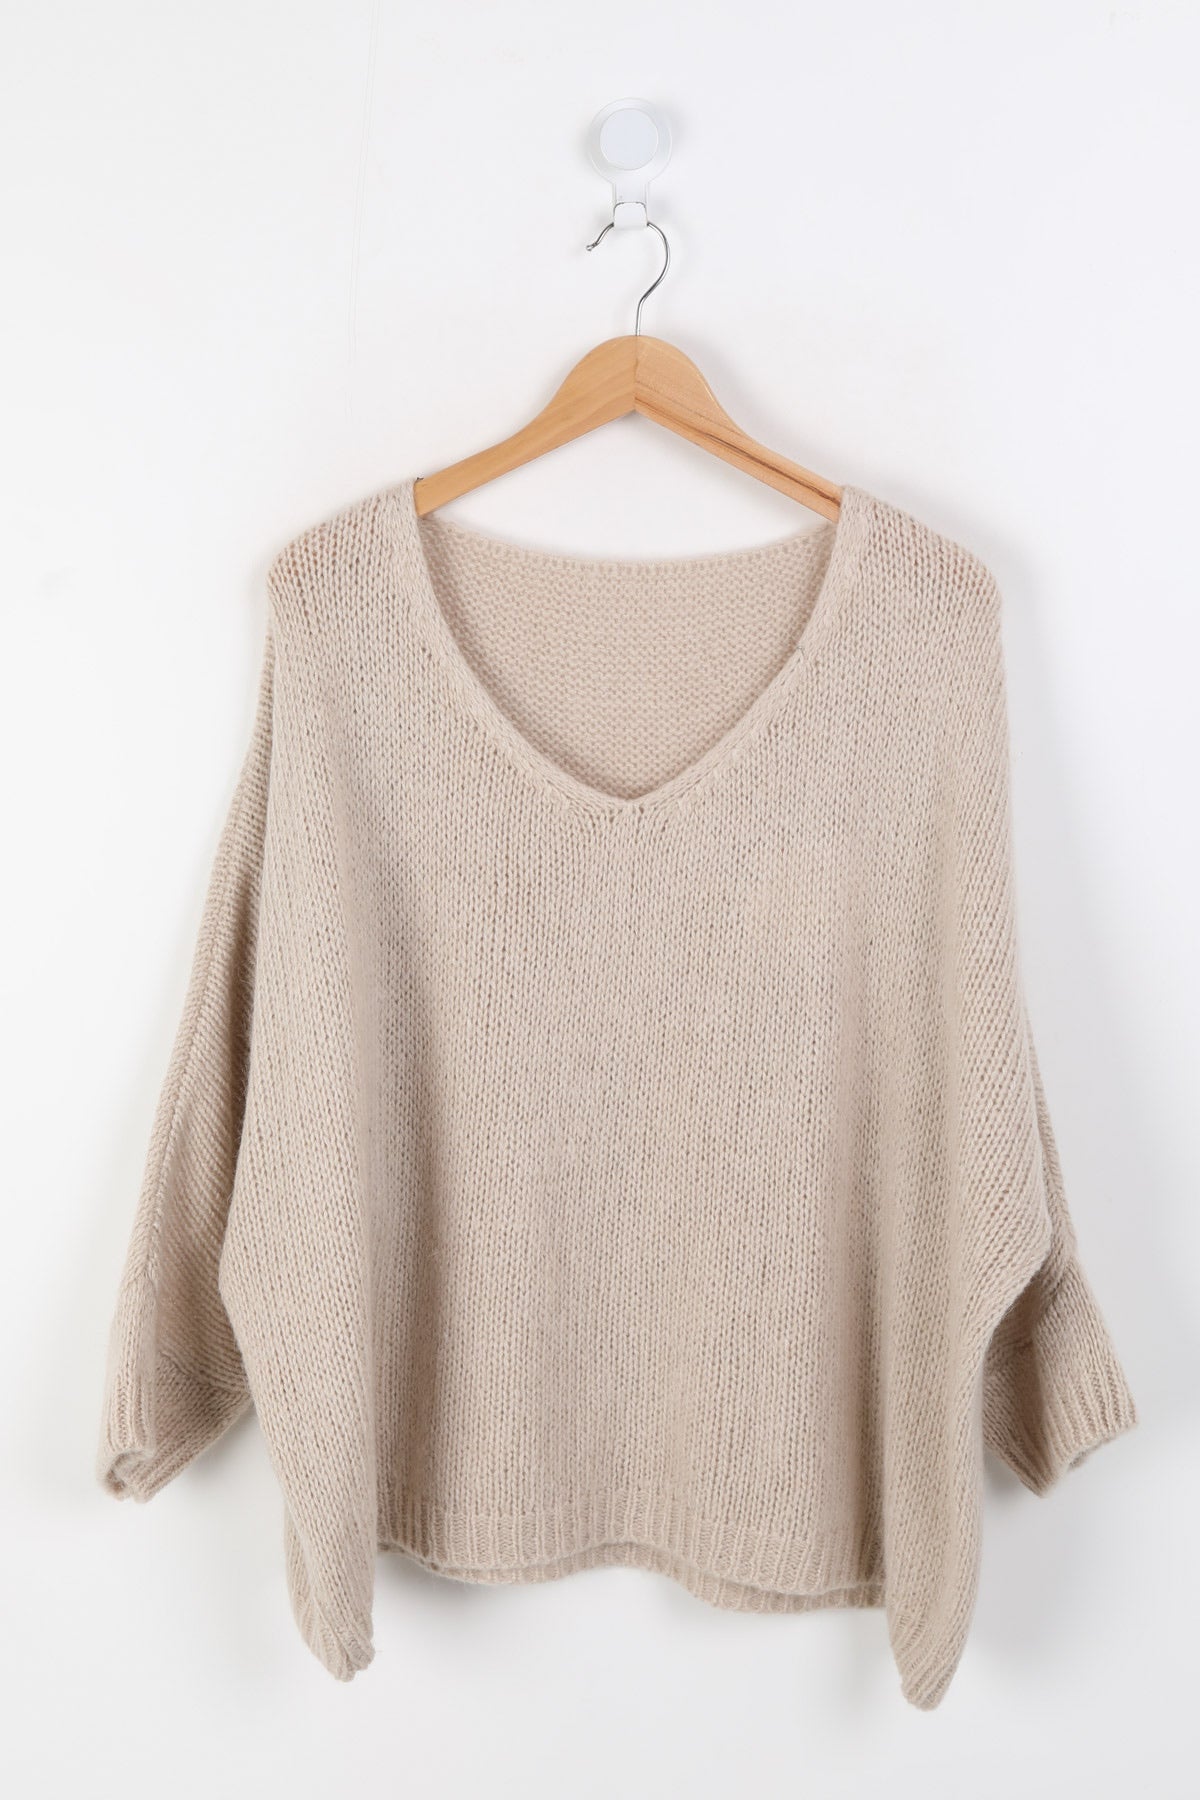 Sands - Cream Mohair Mix Sweater - Sands Boutique clothing and gifts